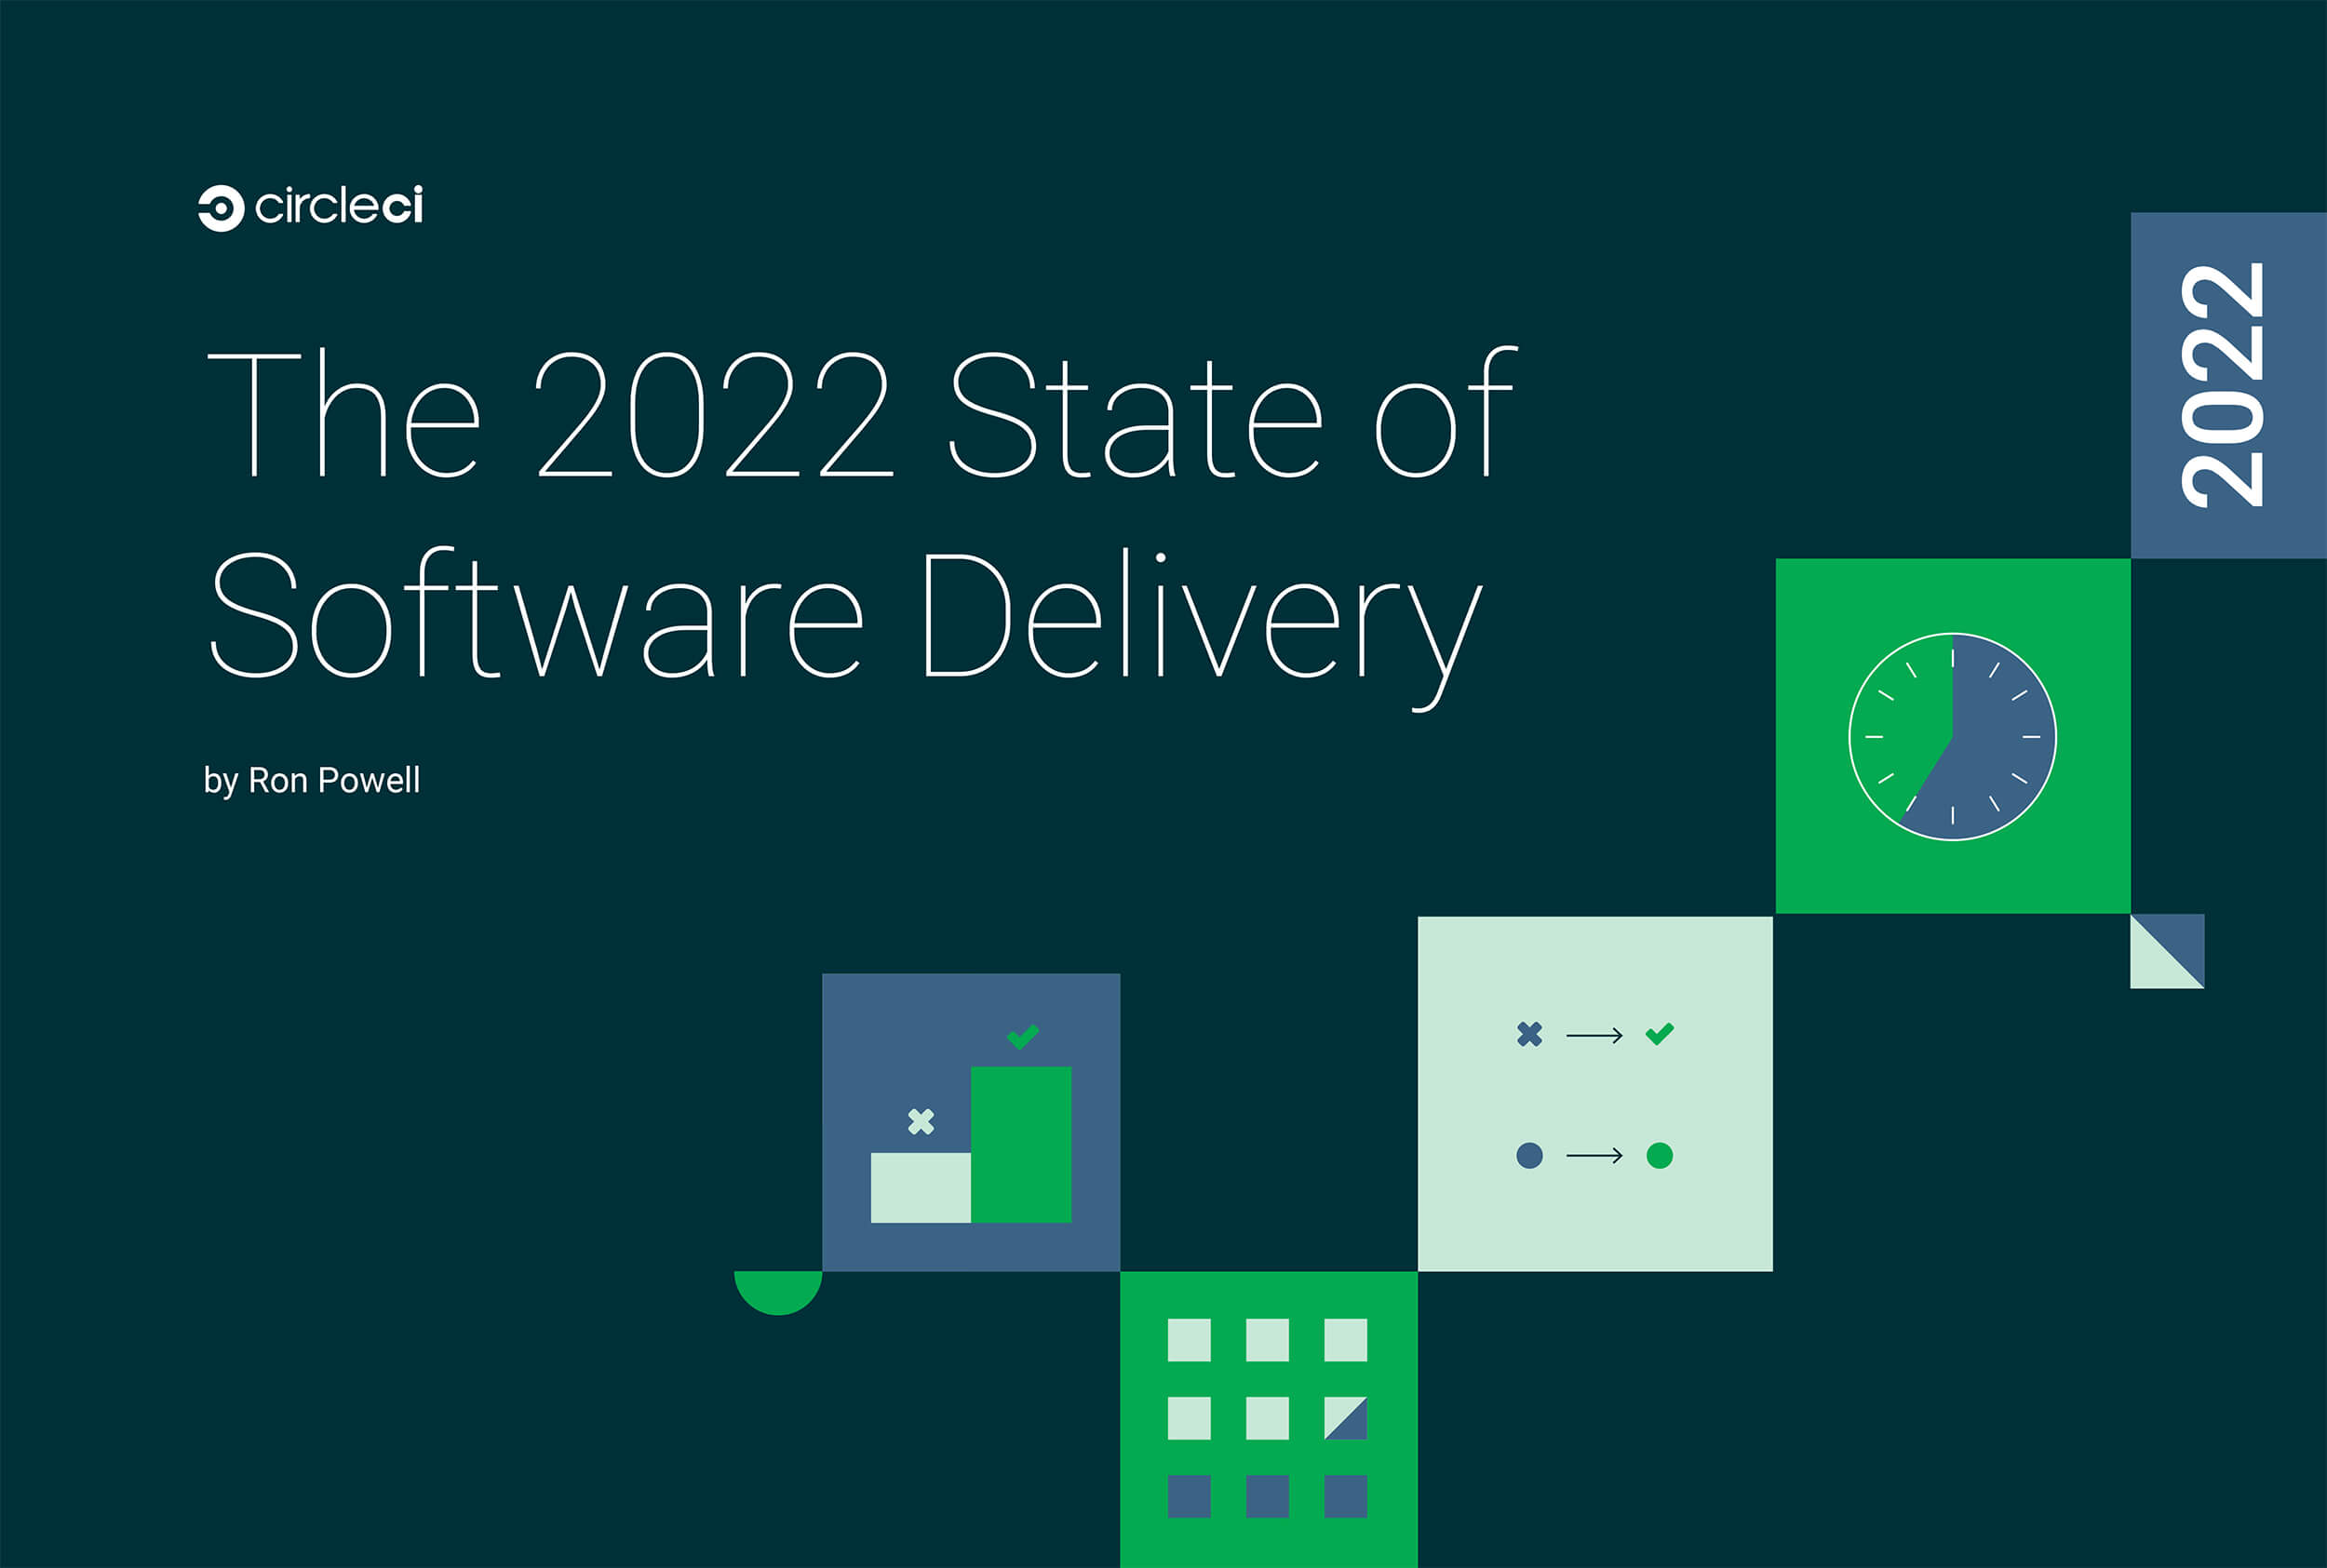 Cover of 2022 State of Software Delivery report.